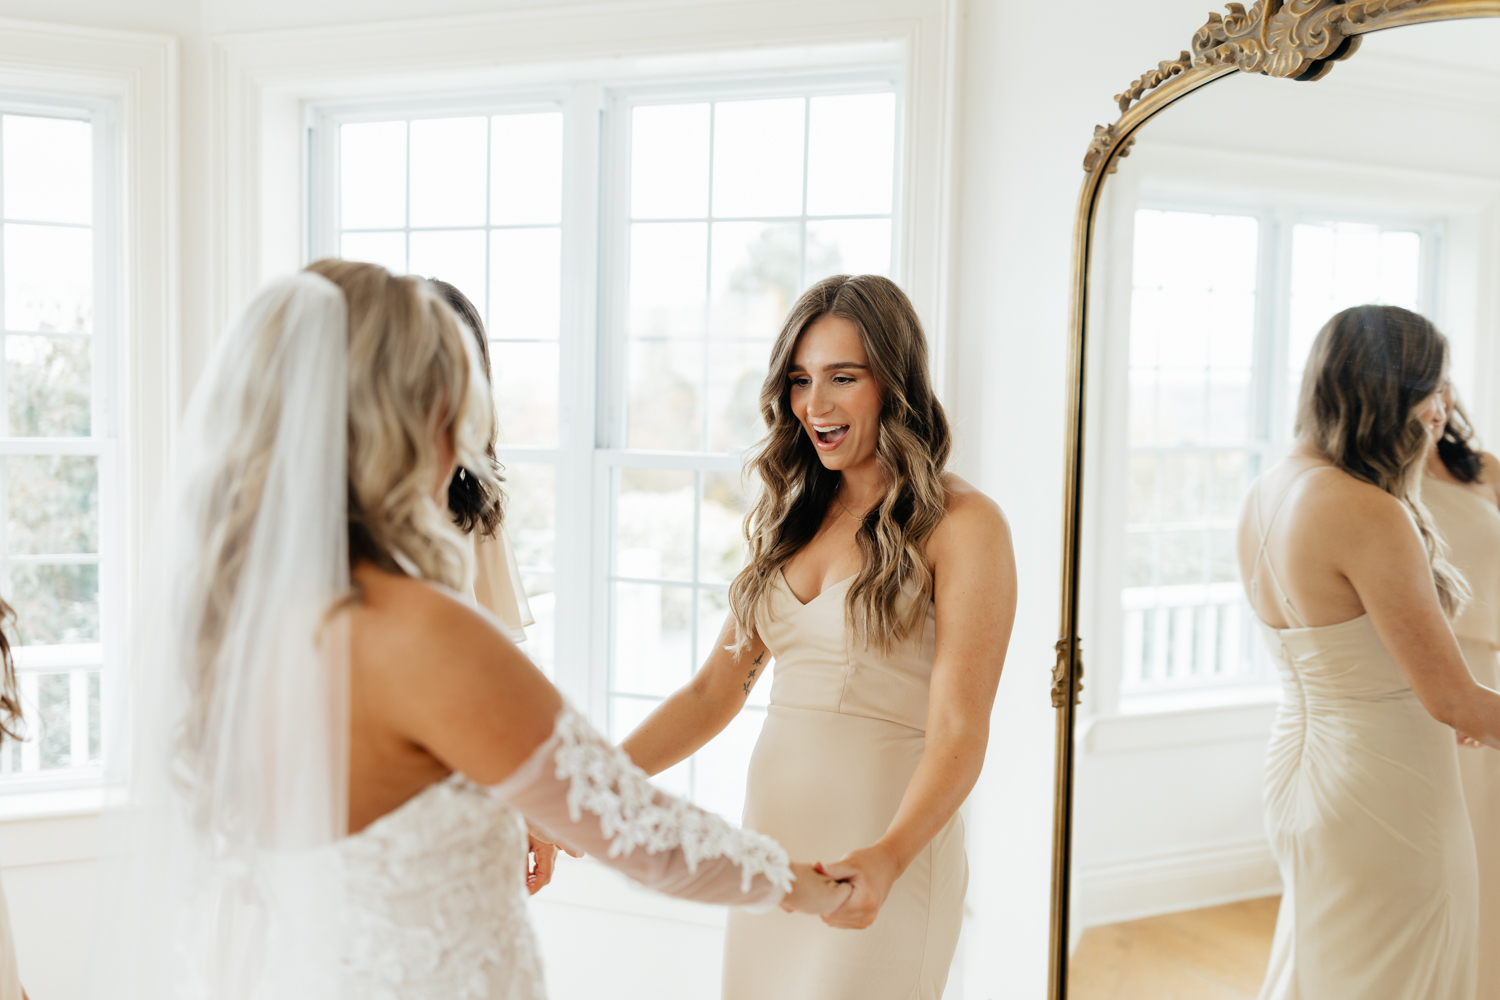 Bride doing a first look reveal with her dad